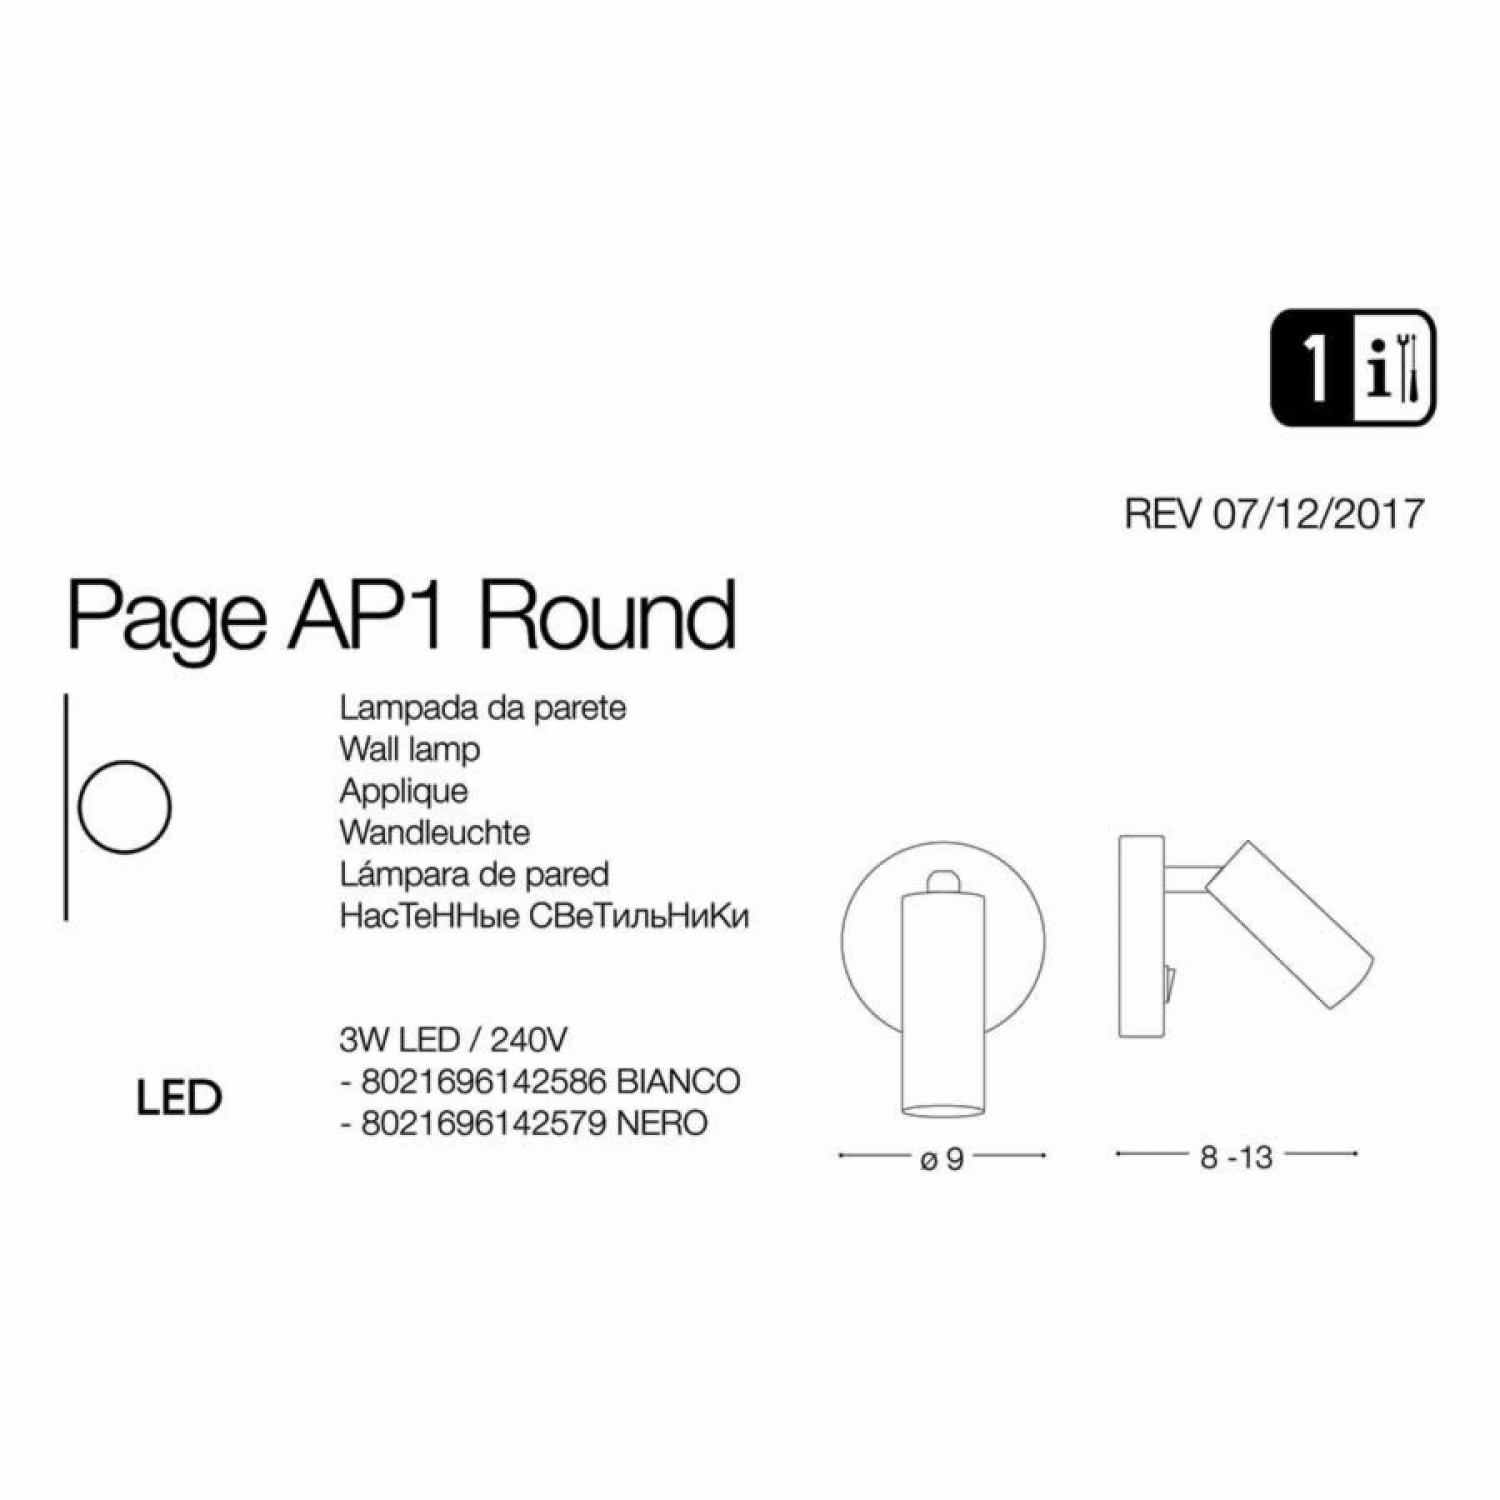 Бра-спот Ideal Lux PAGE AP ROUND BIANCO 142586